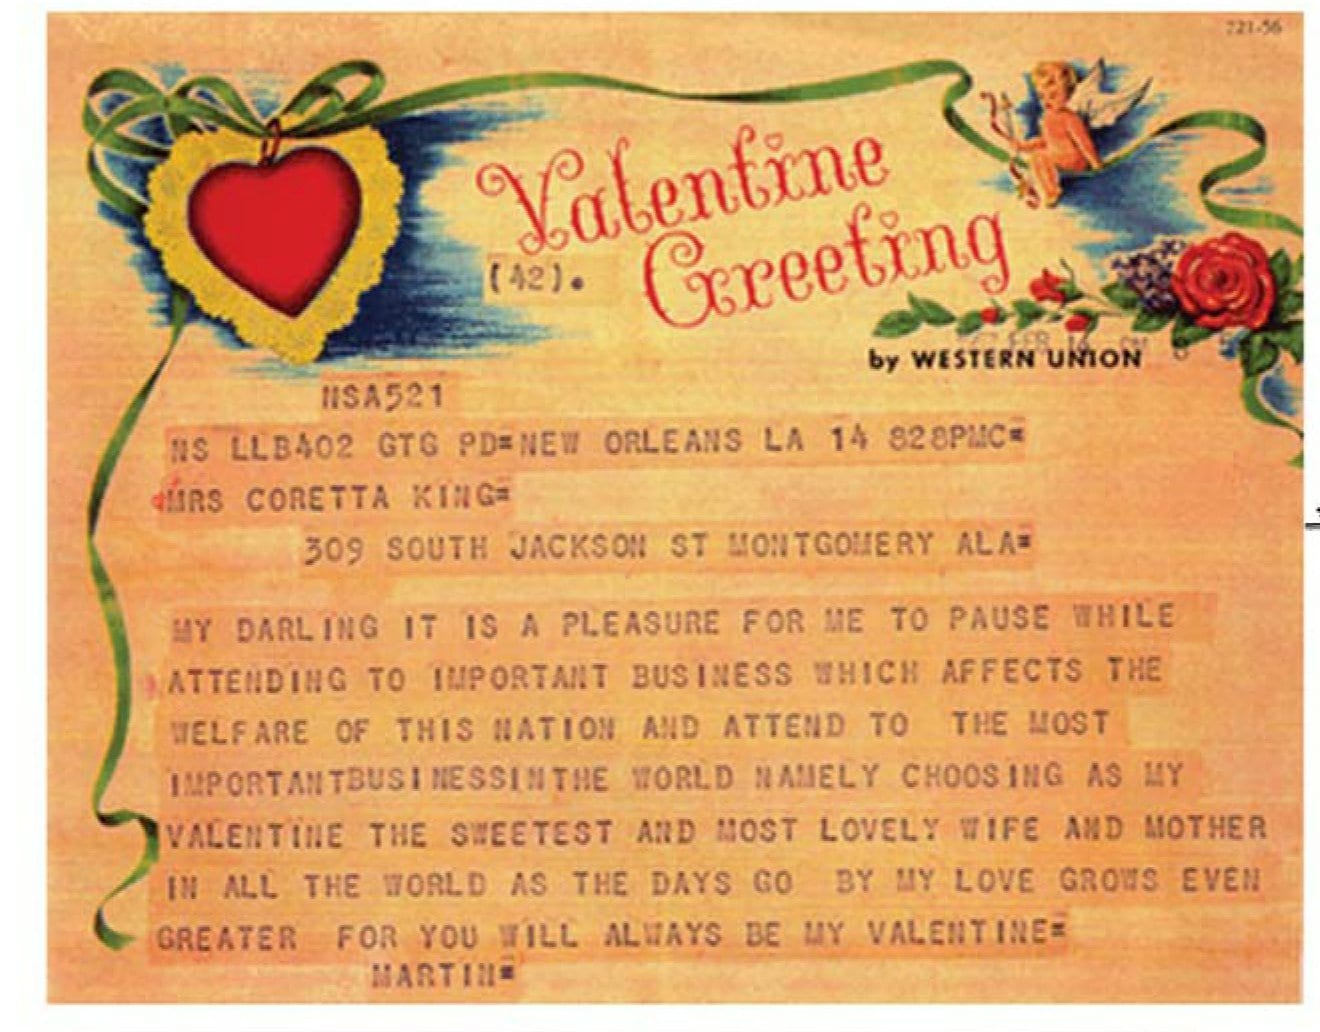 Copy of the Western Union message that Martin sent Coretta on Valentine’s Day in 1957. Photo courtesy of Felicity Redevelopment, Inc.